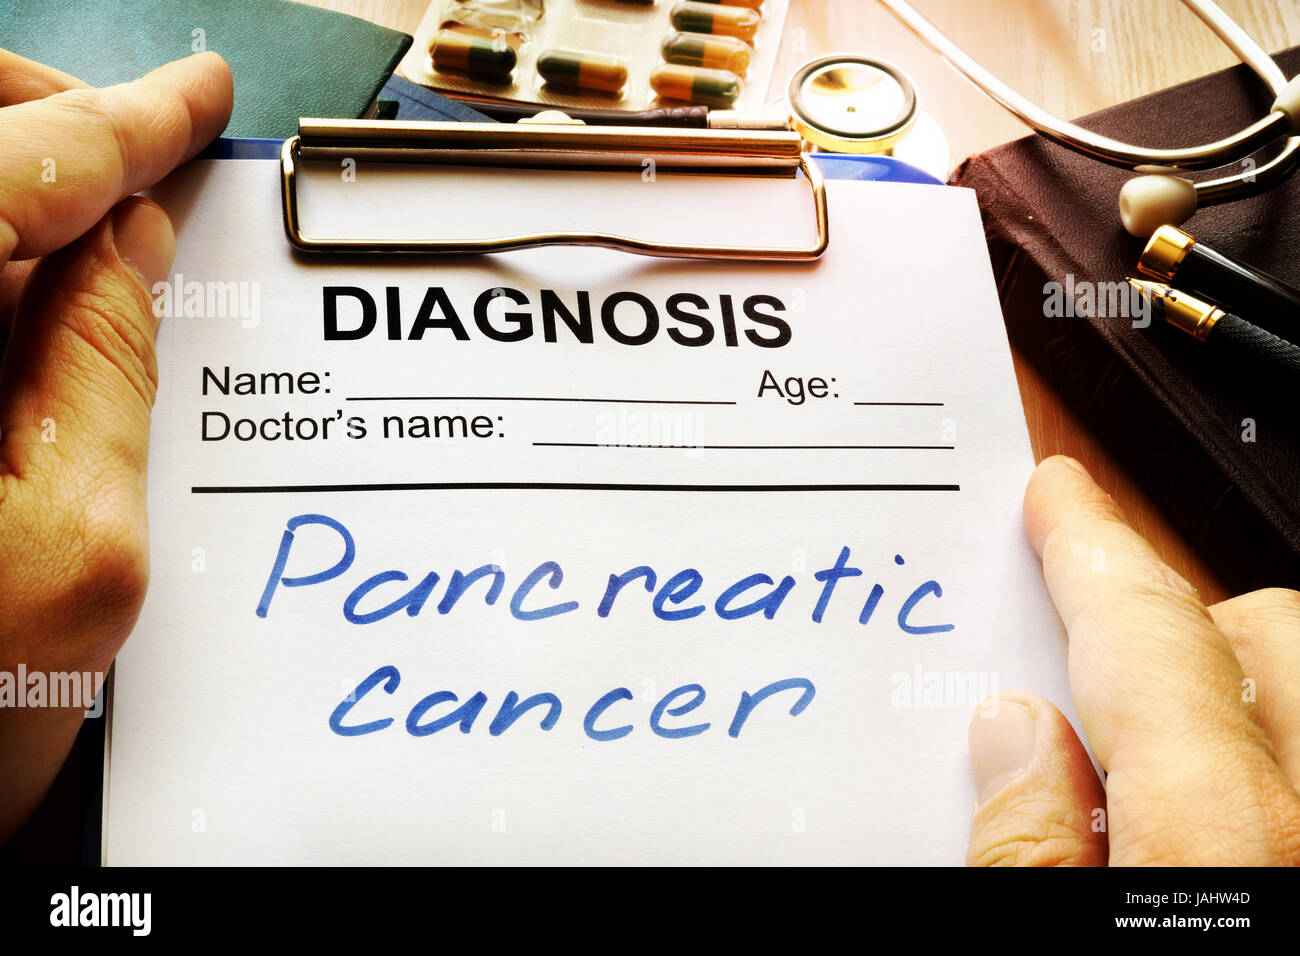 Pancreatic cancer diagnosis on a medical form. Stock Photo